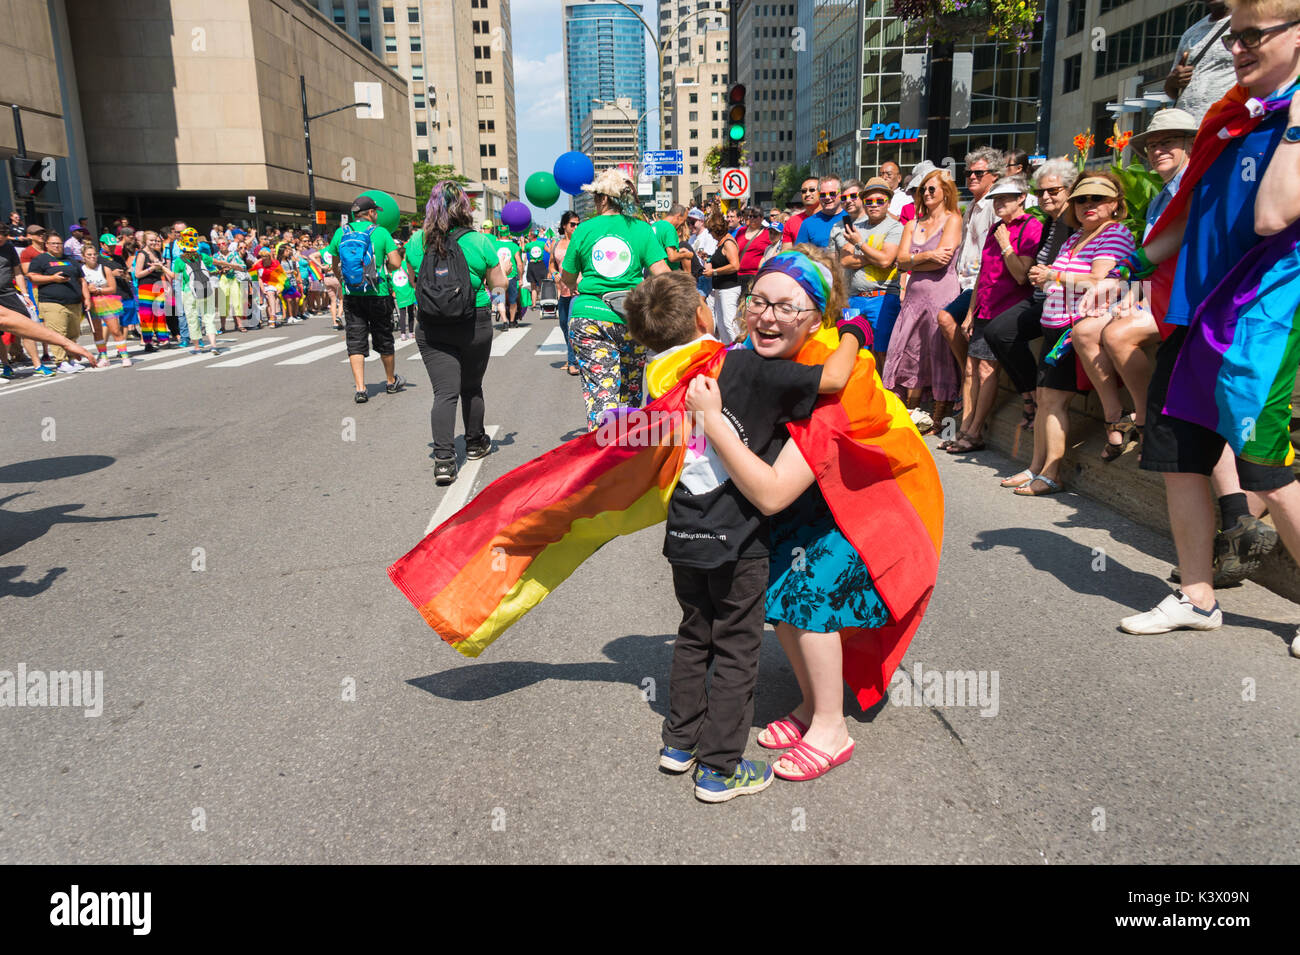 Montreal, CANADA - 20 August 2017: Ayoung boy wearing a rainbow cloat is hugging a young woman at Montreal Gay Pride Parade - Free Hugs Stock Photo